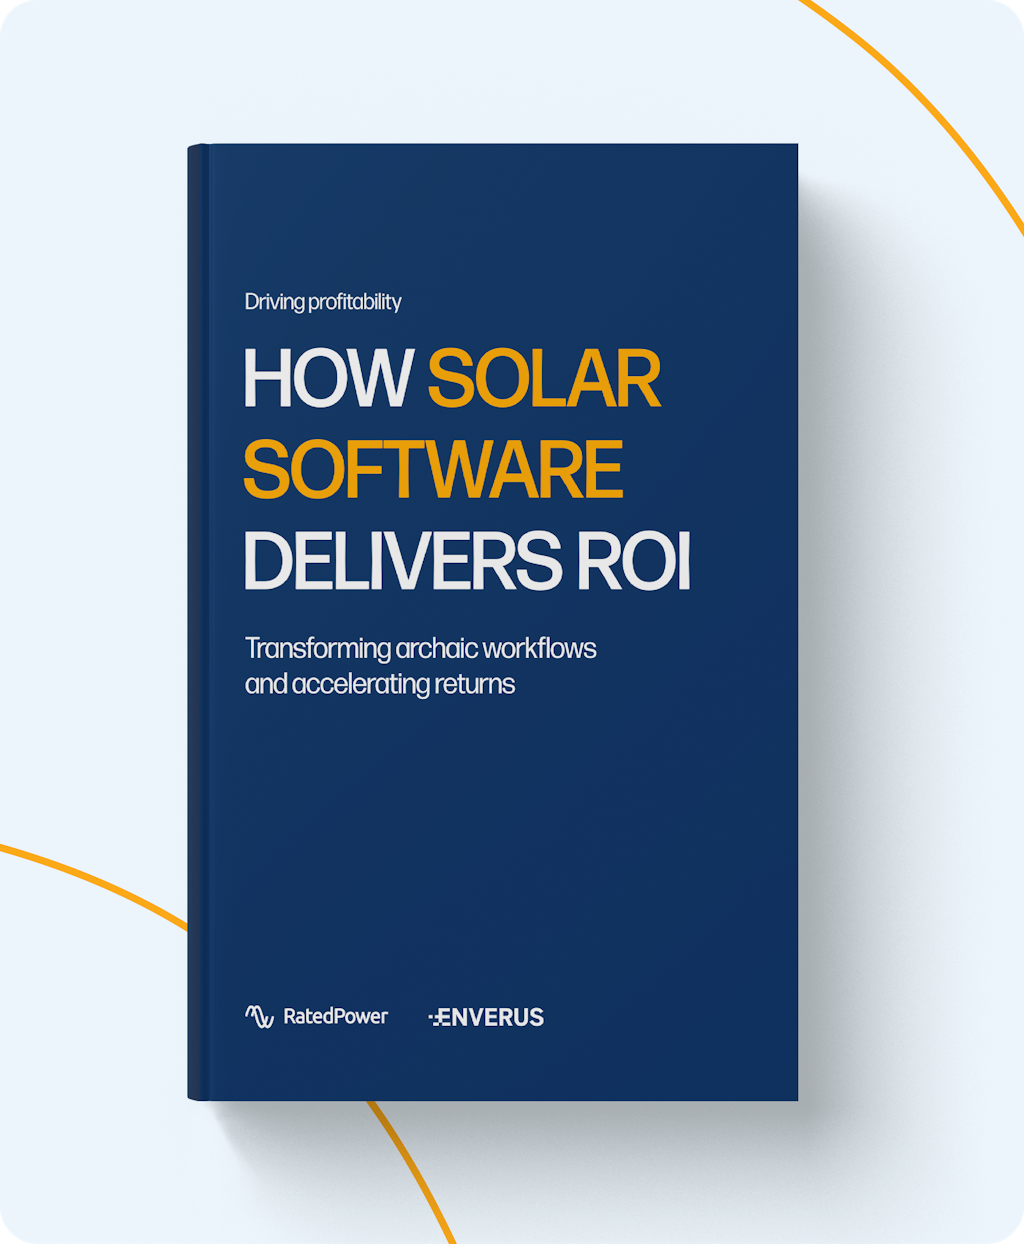 How solar software delivers ROI